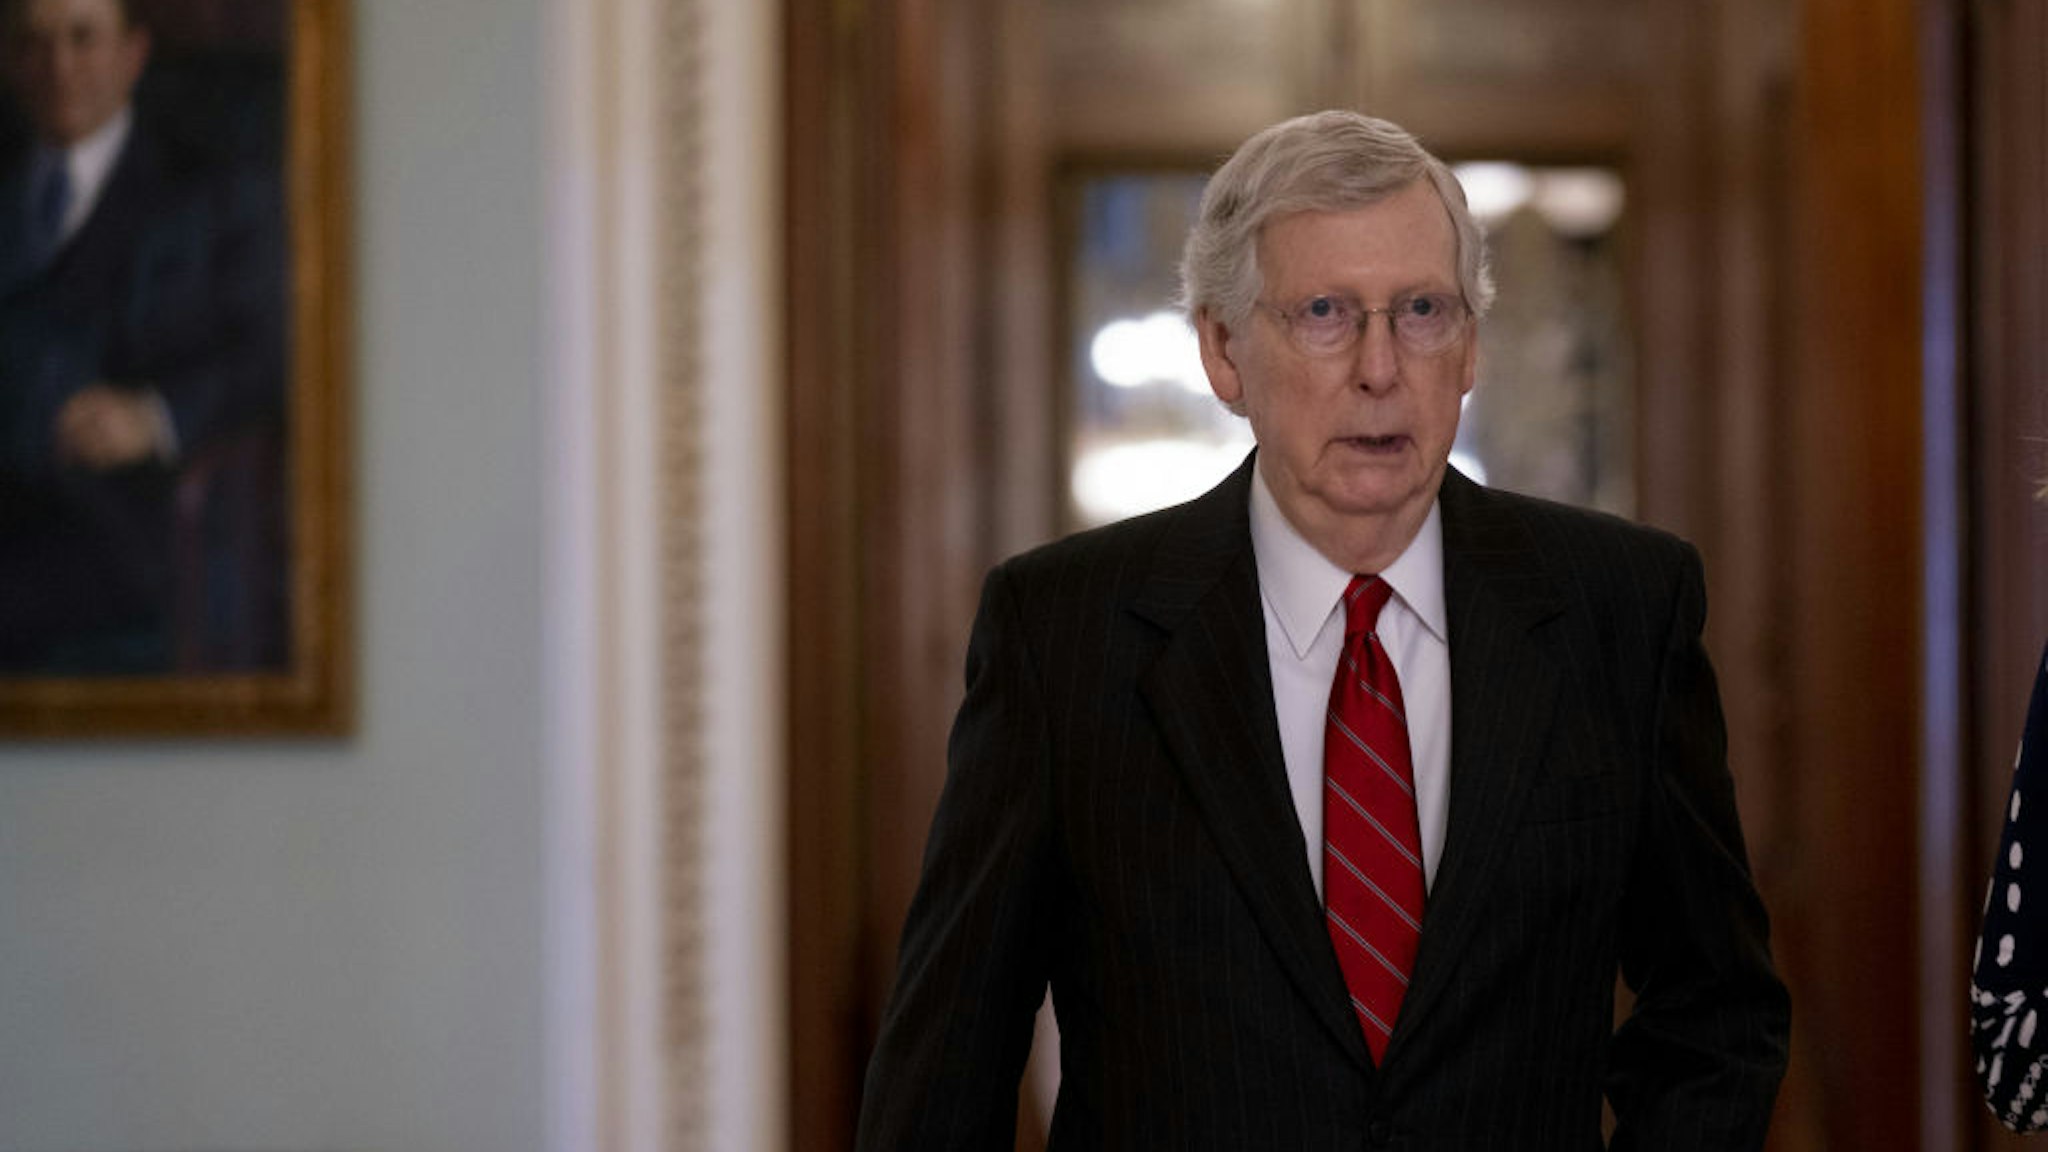 Senate Majority Leader Mitch McConnell walks toward his office after voting in the Senate Chamber